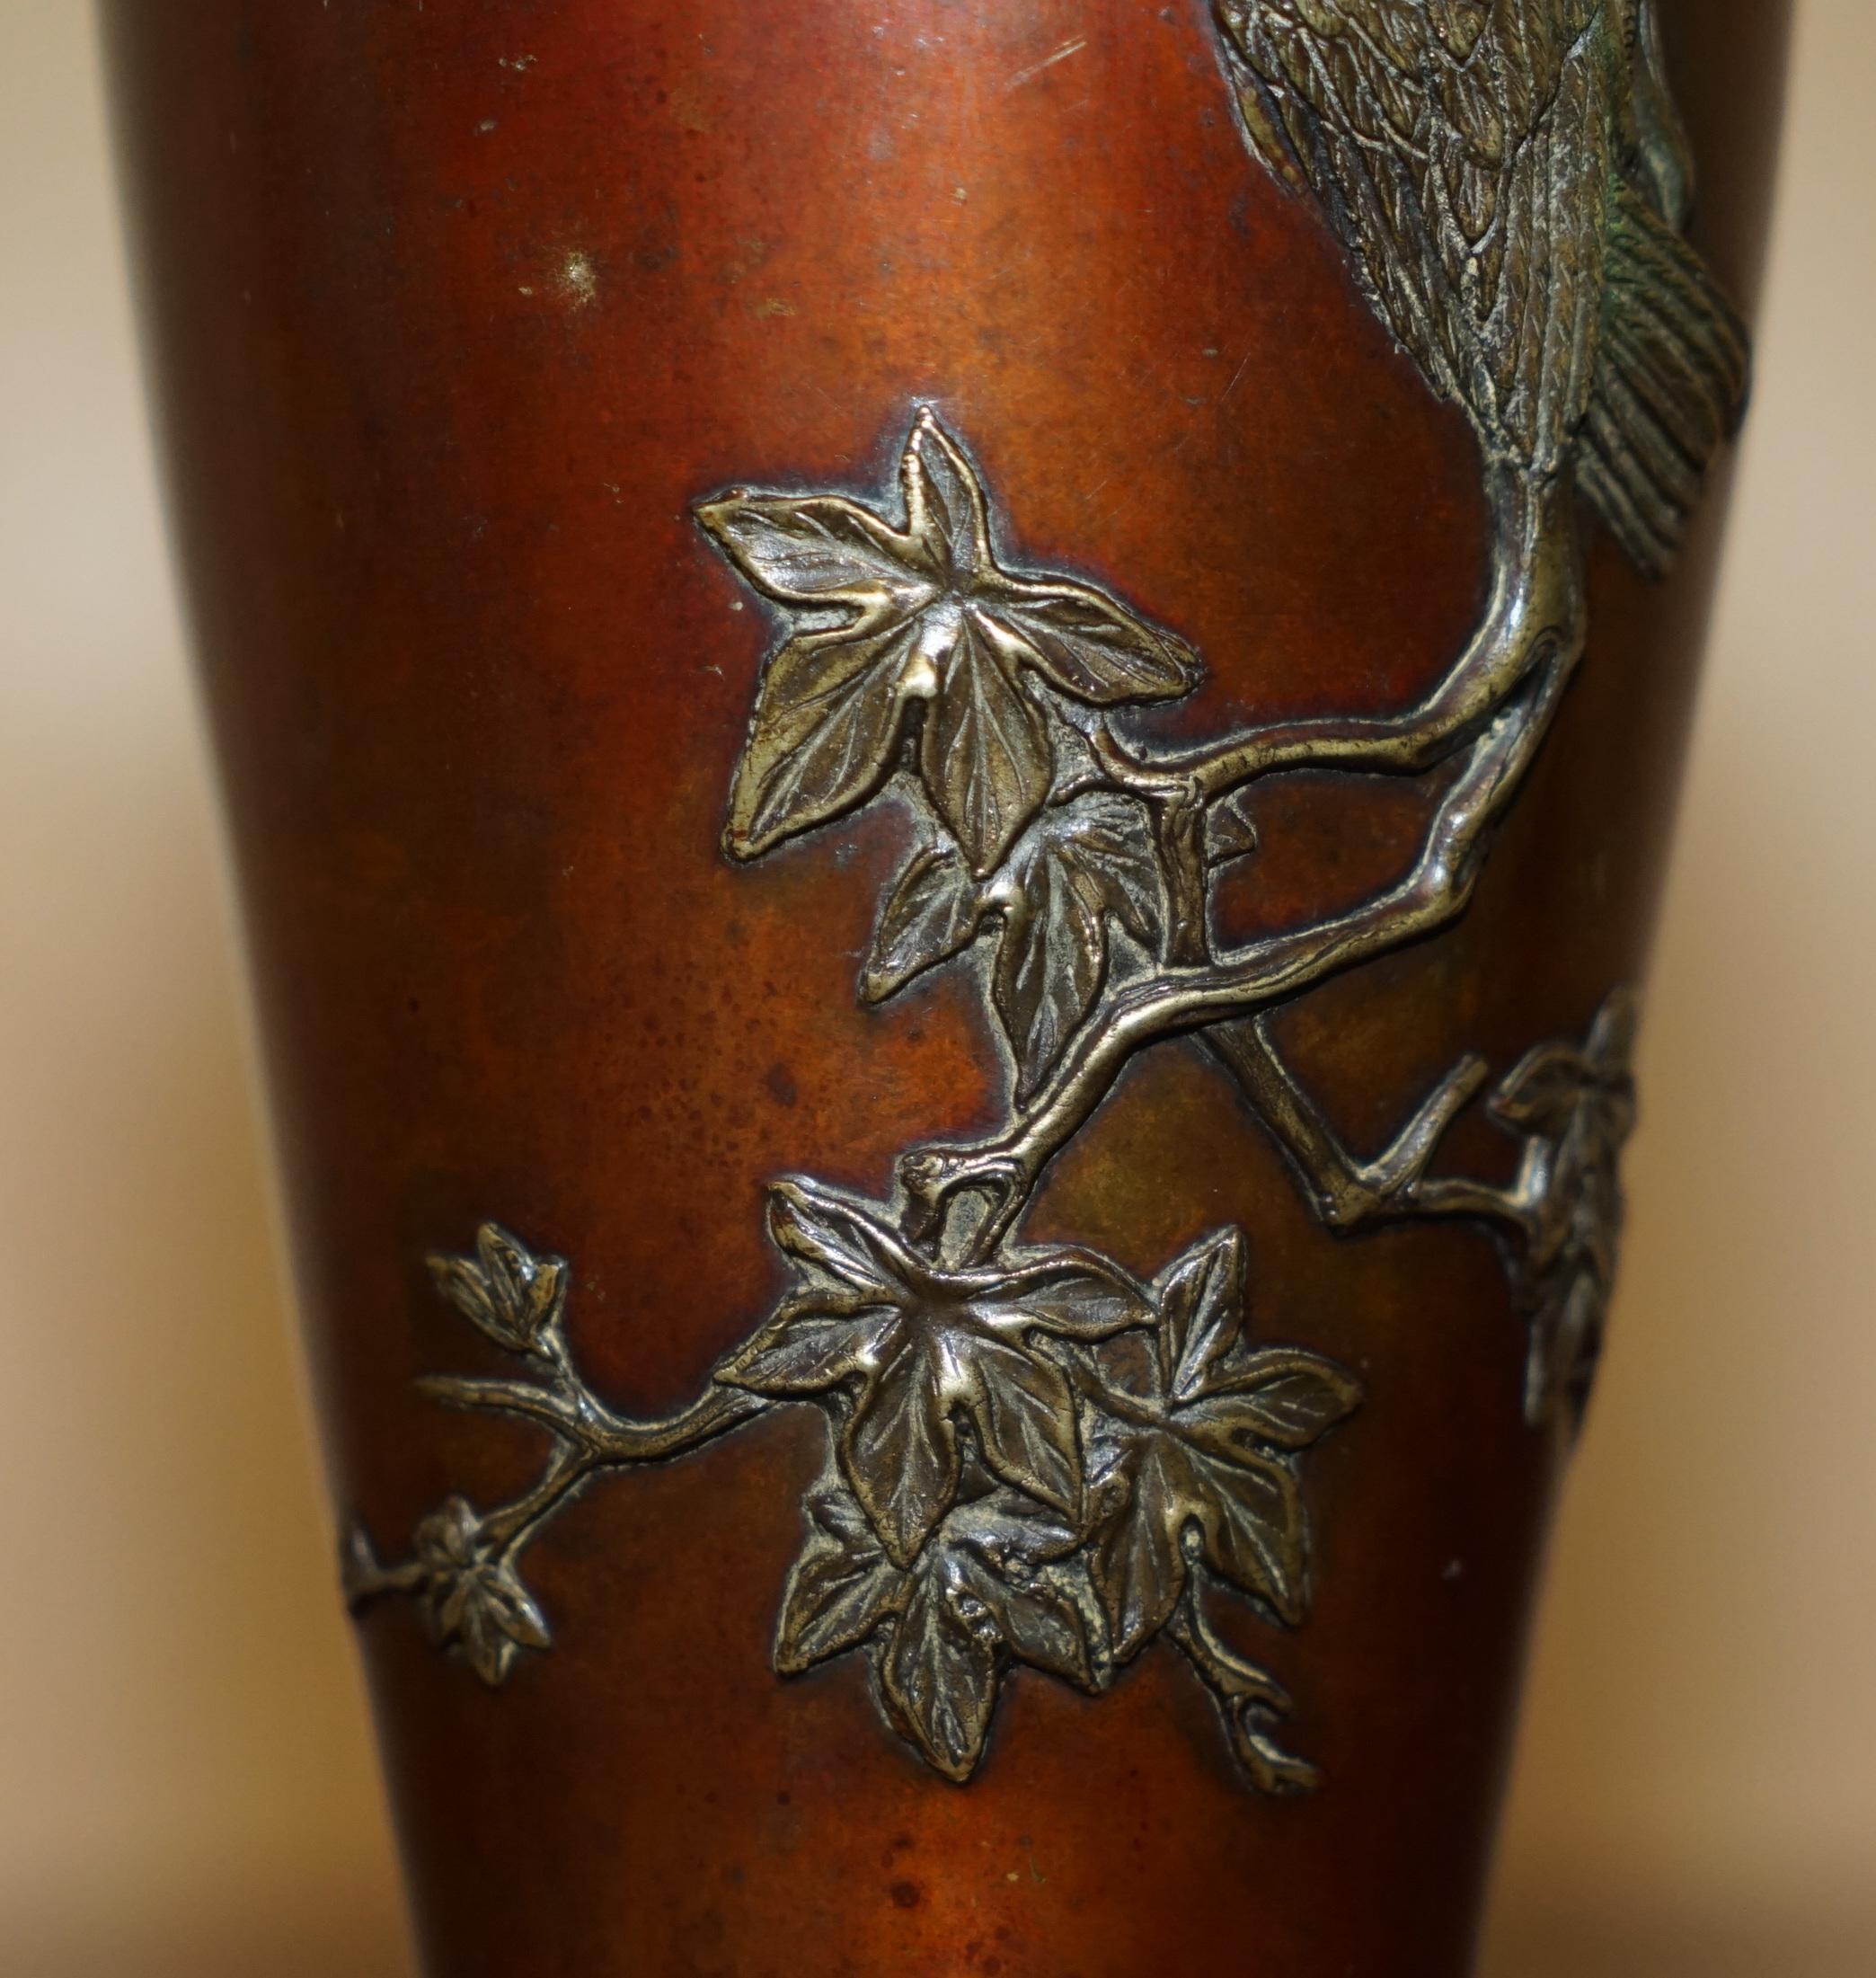 Japanese STUNNING SiGNED ANTIQUE CIRCA 1870 JAPANESE VASE DEPICTING A BIRD ON A BRANCH For Sale